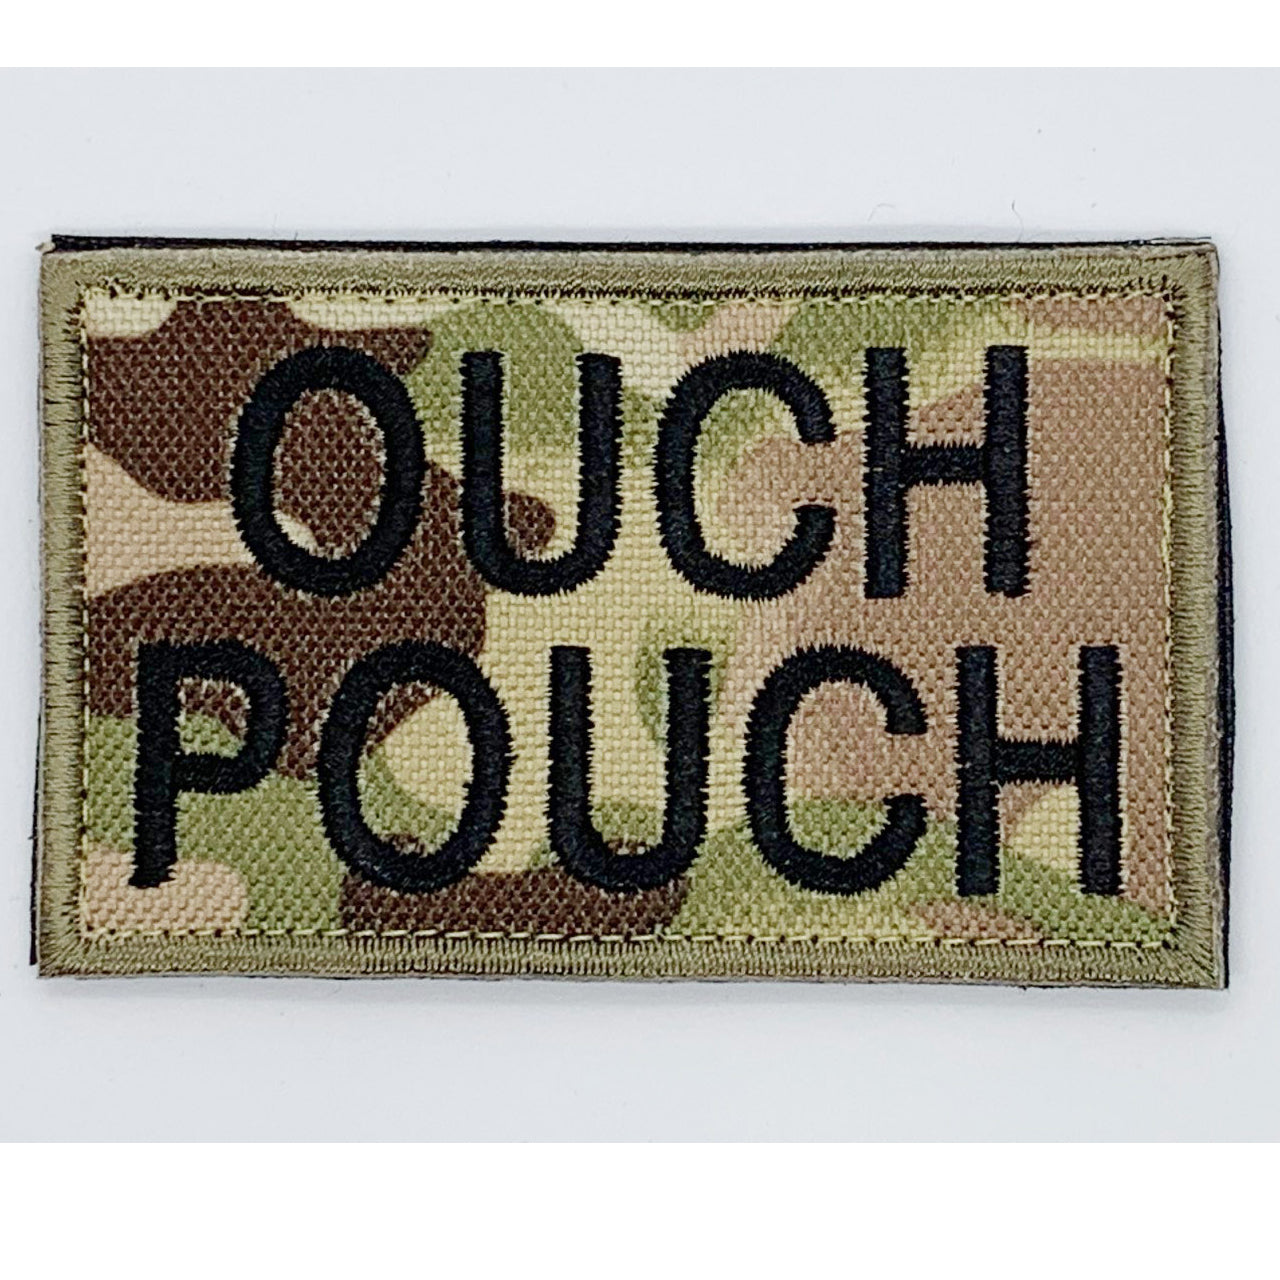 Ouch Pouch Multicam Patch Hook & Loop.   Size: 8x5cm   HOOK AND LOOP BACKED PATCH(BOTH PROVIDED) www.defenceqstore.com.au